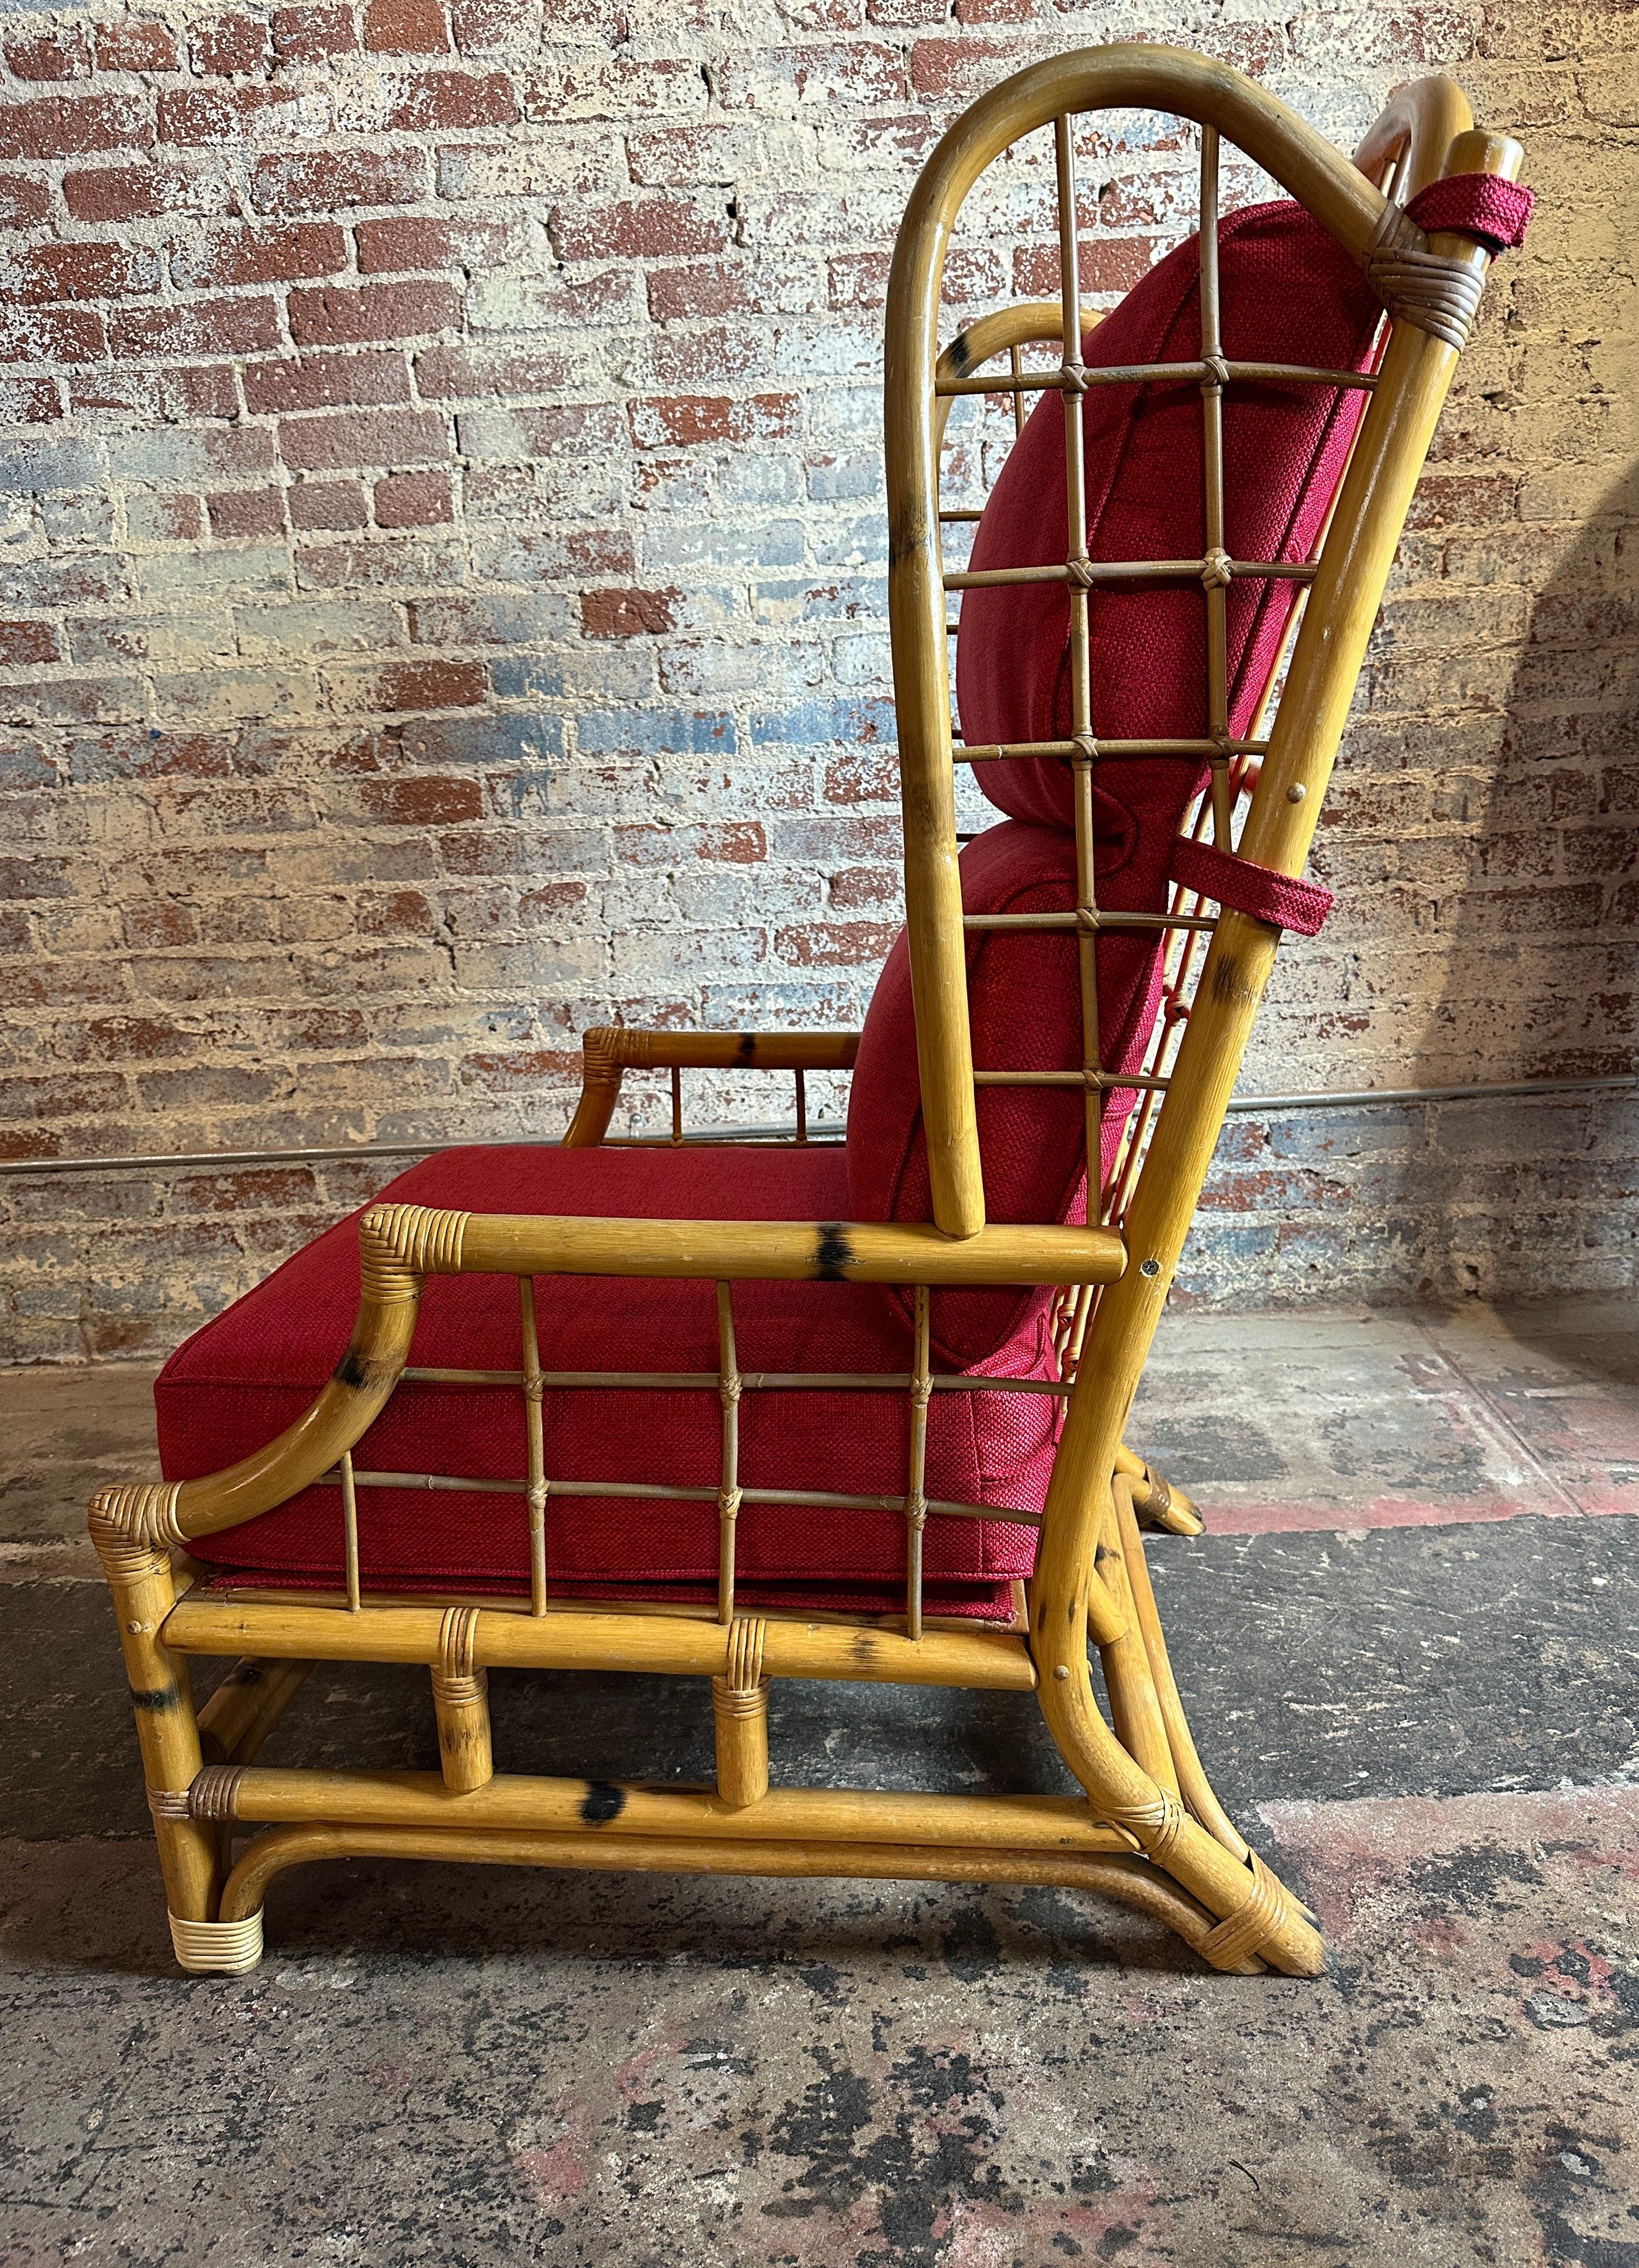 Bamboo Lounge Chair with Ottoman and Wingbacks In Excellent Condition For Sale In Pasadena, CA